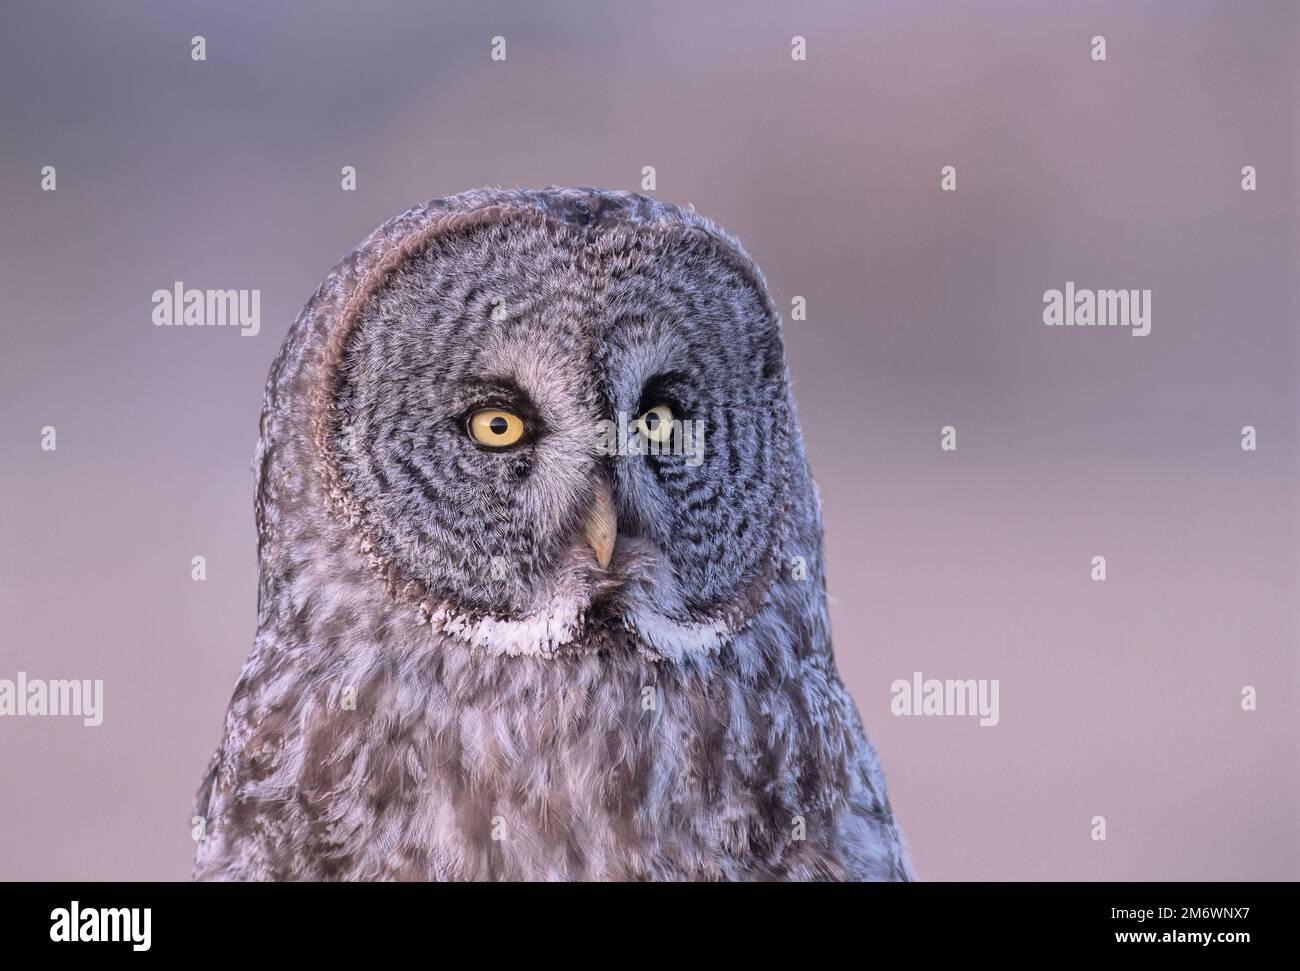 An prtrait view of a Great Grey Owl 'Strix nebulosa', perched on a slender stick in the warm evening light Stock Photo